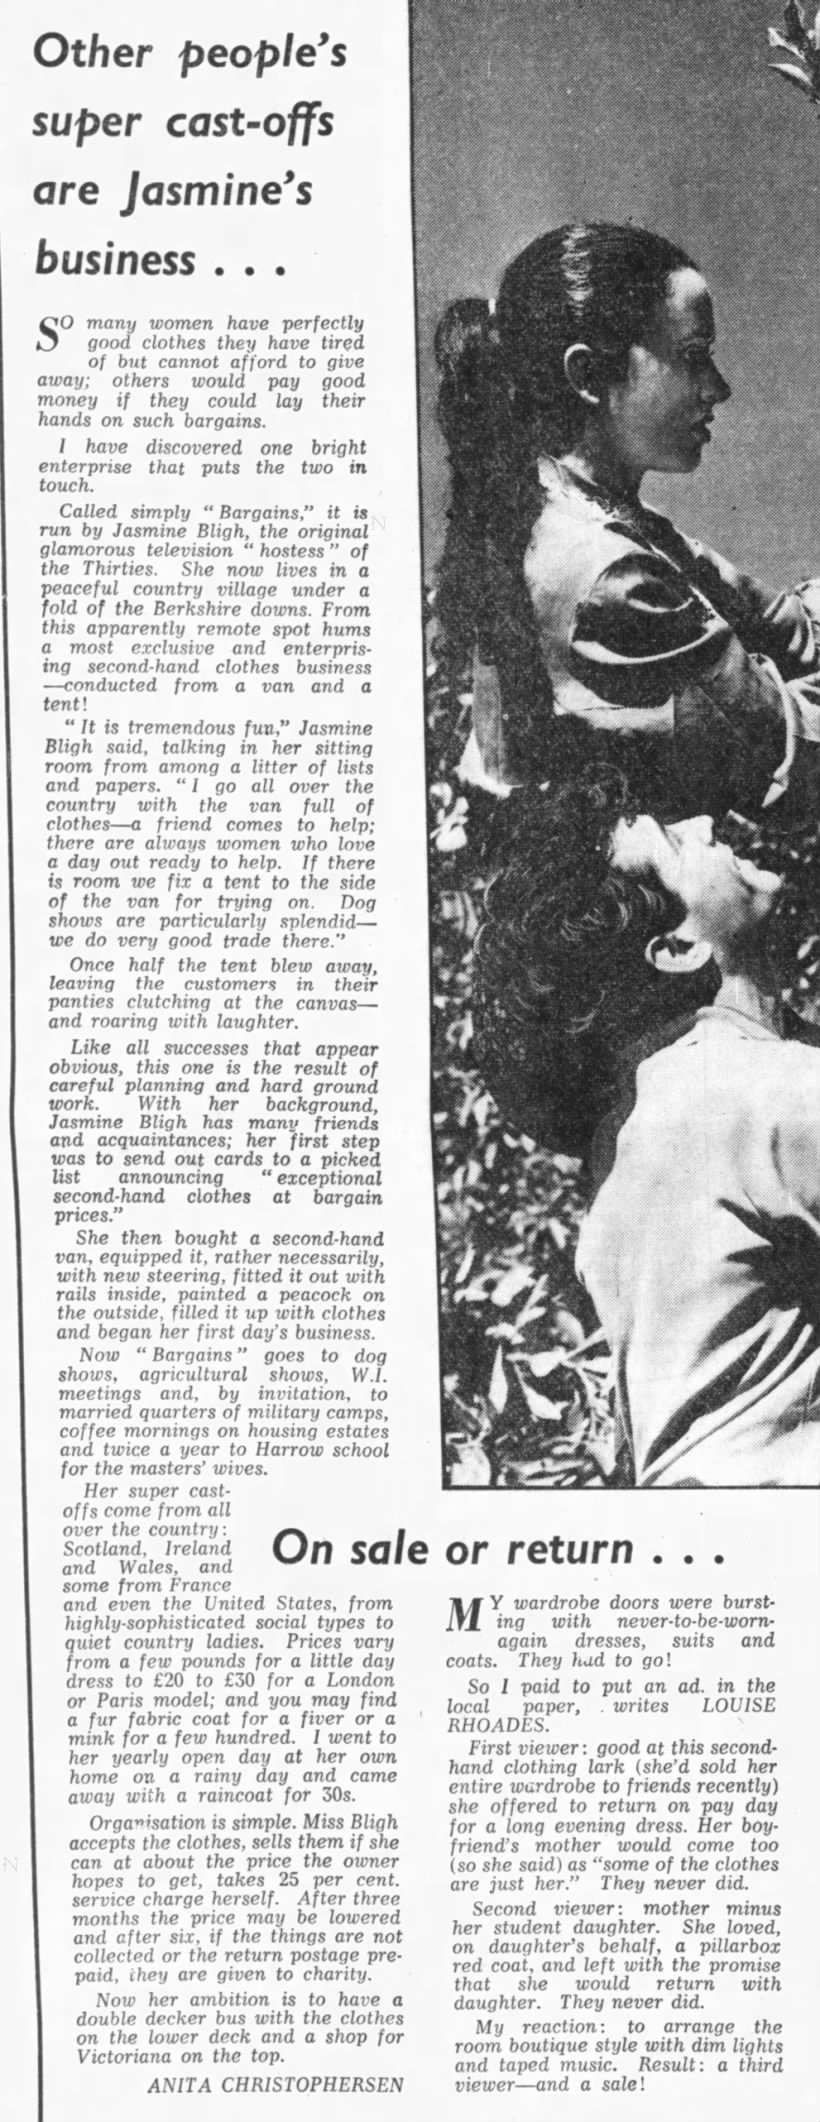 Jasmine Bligh "Bargain" - The Daily Telegraph - 1 January 1970 - Page 13